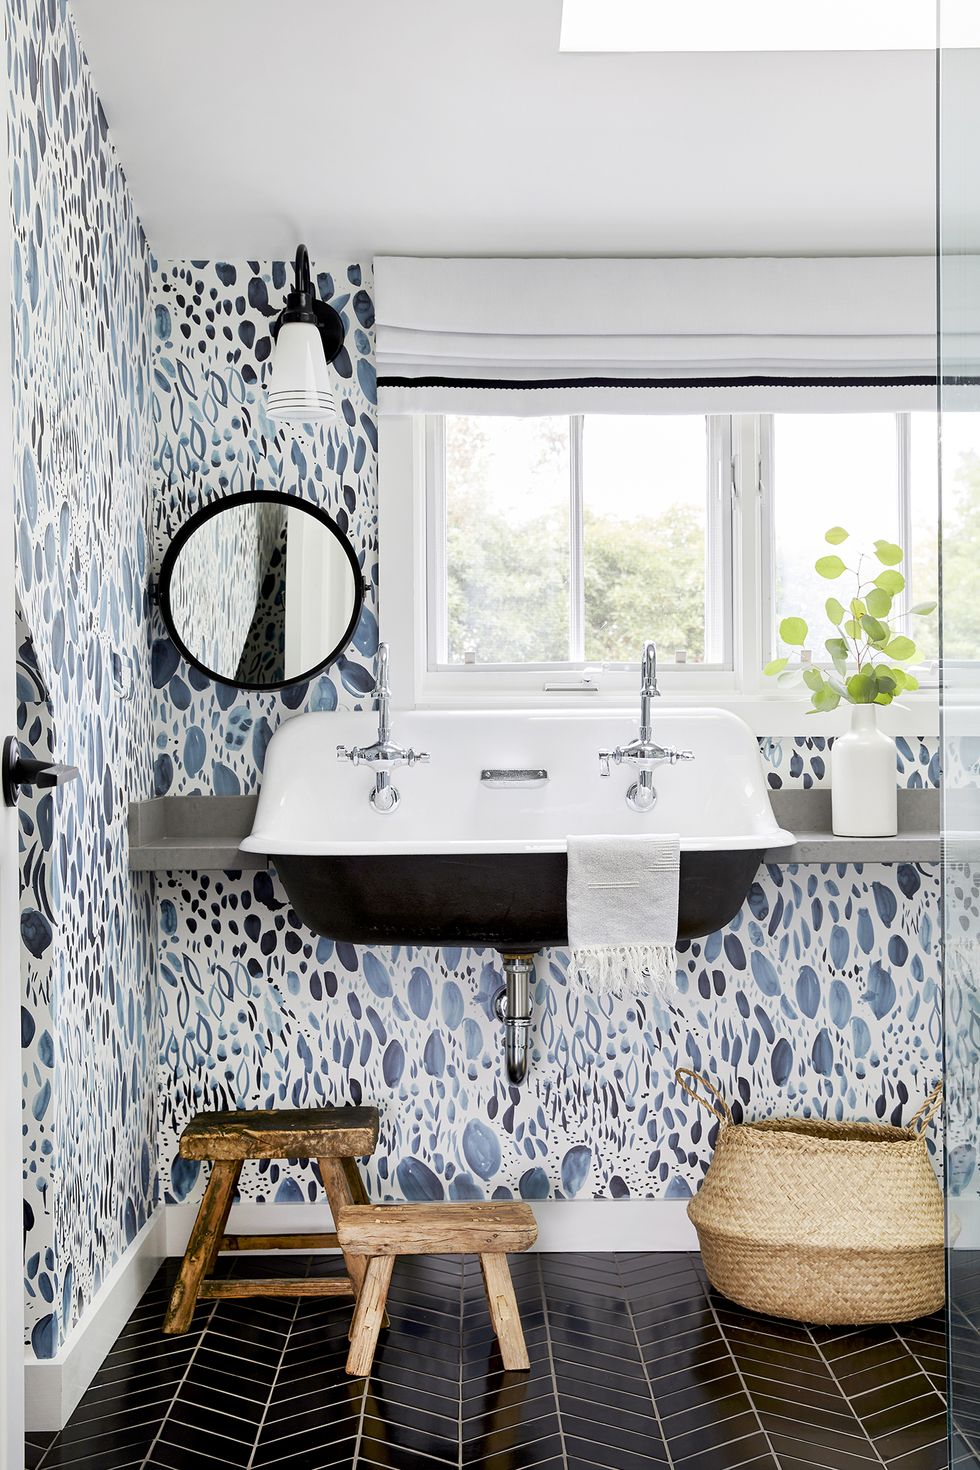 How to make your bathroom more eco-friendly: 11 easy (and cute